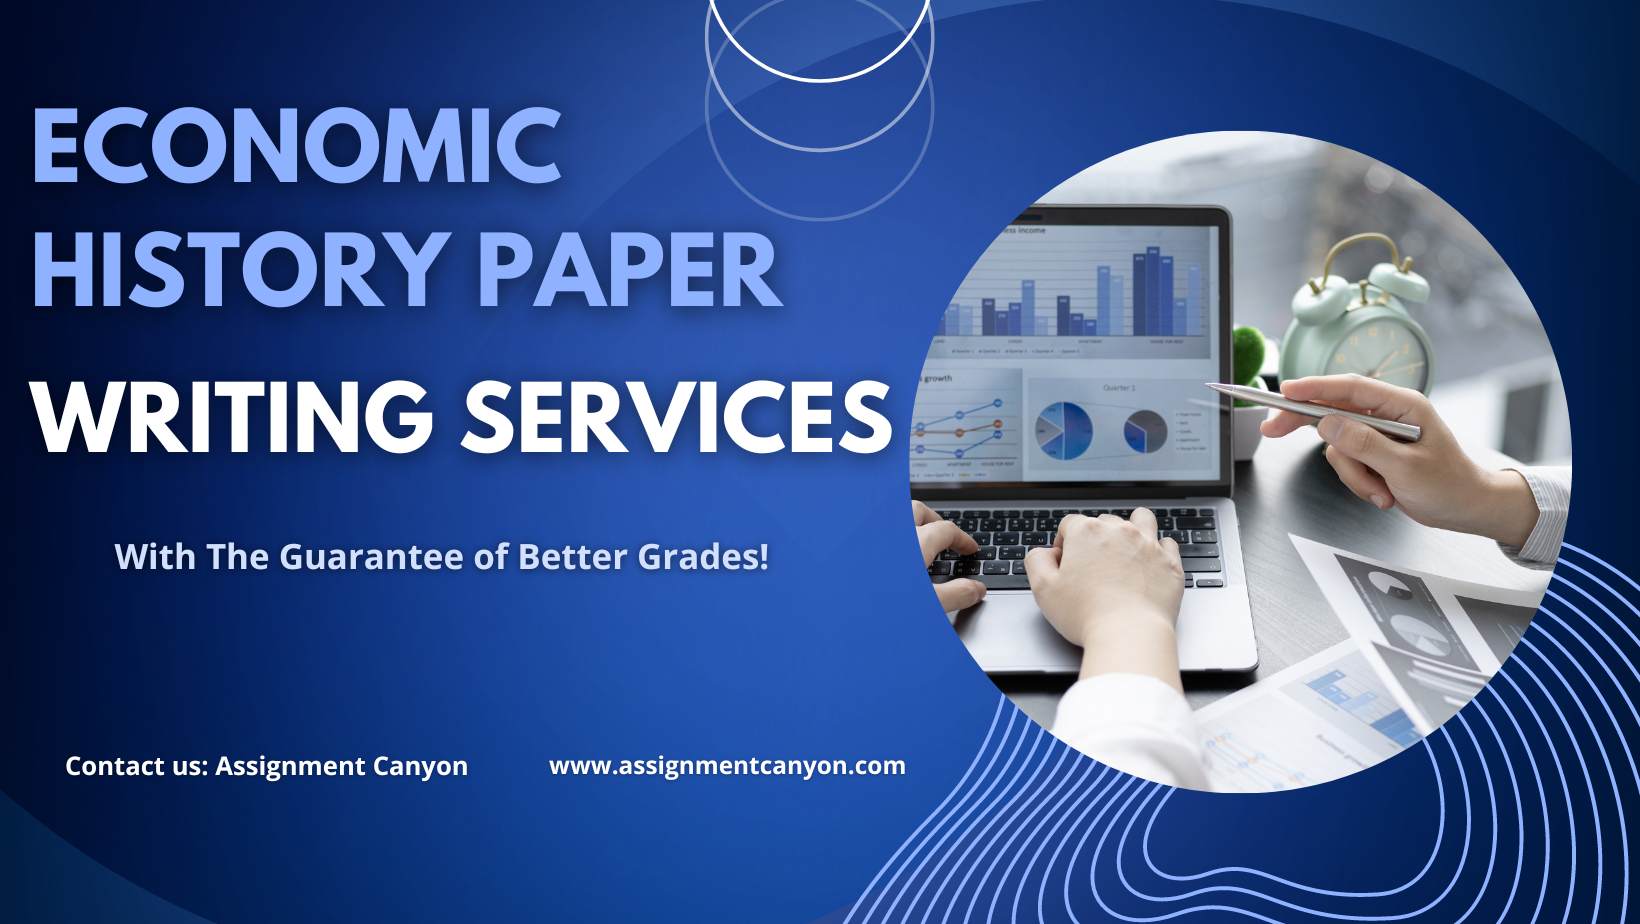 Economic History Paper Writing Services From Assignment Canyon